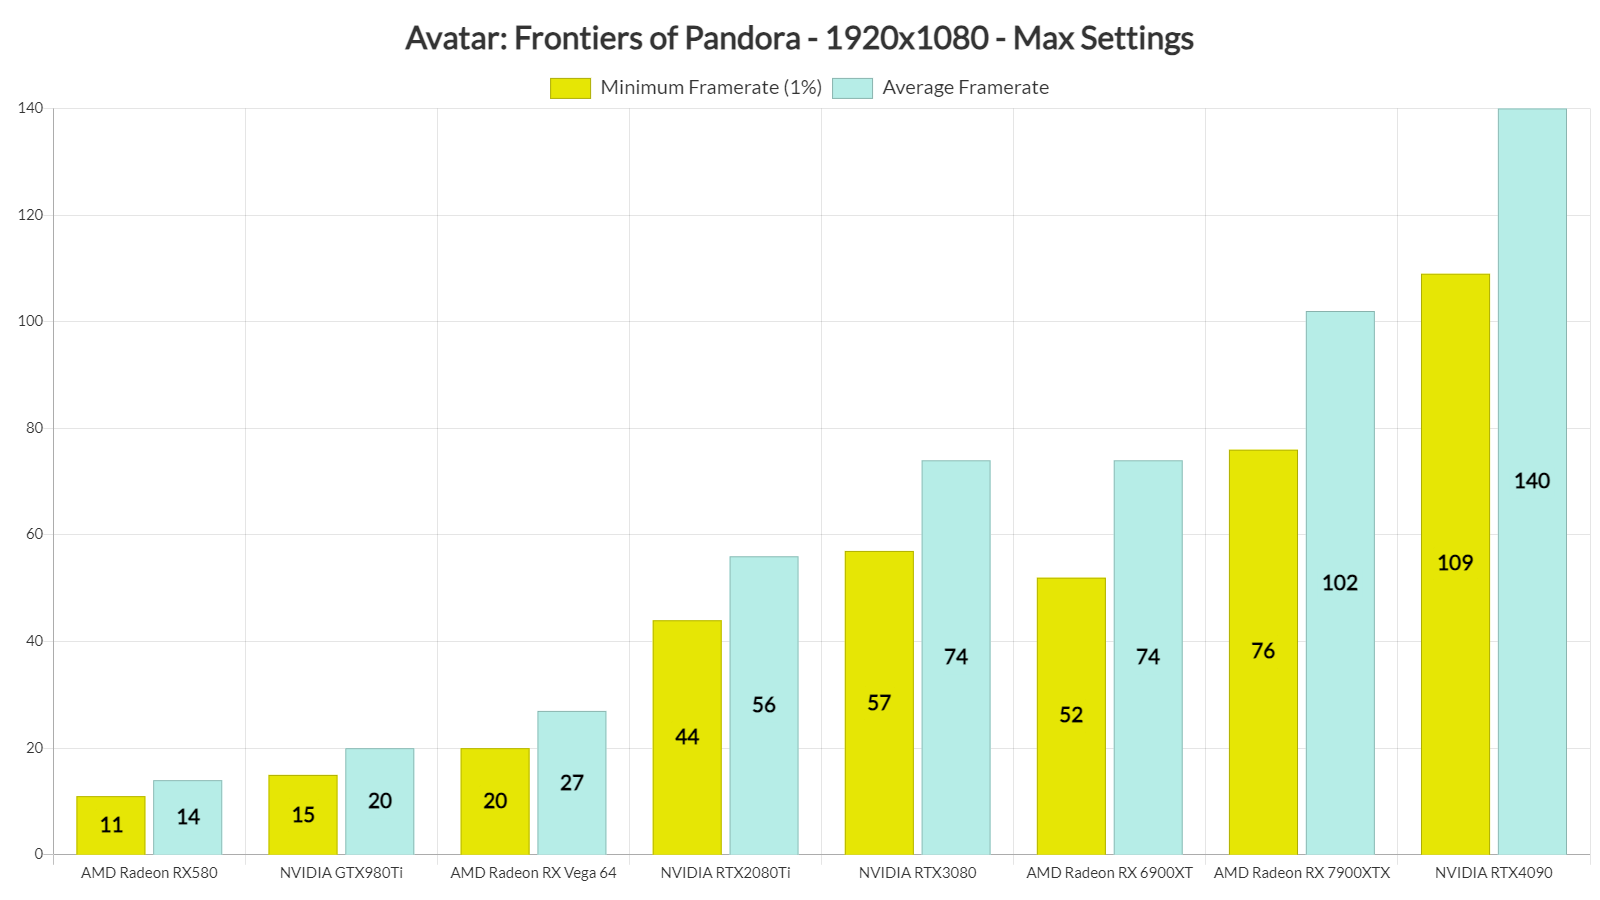 Avatar: Frontiers of Pandora Performance Benchmark Review - 30+ GPUs Tested  - Performance & VRAM Usage